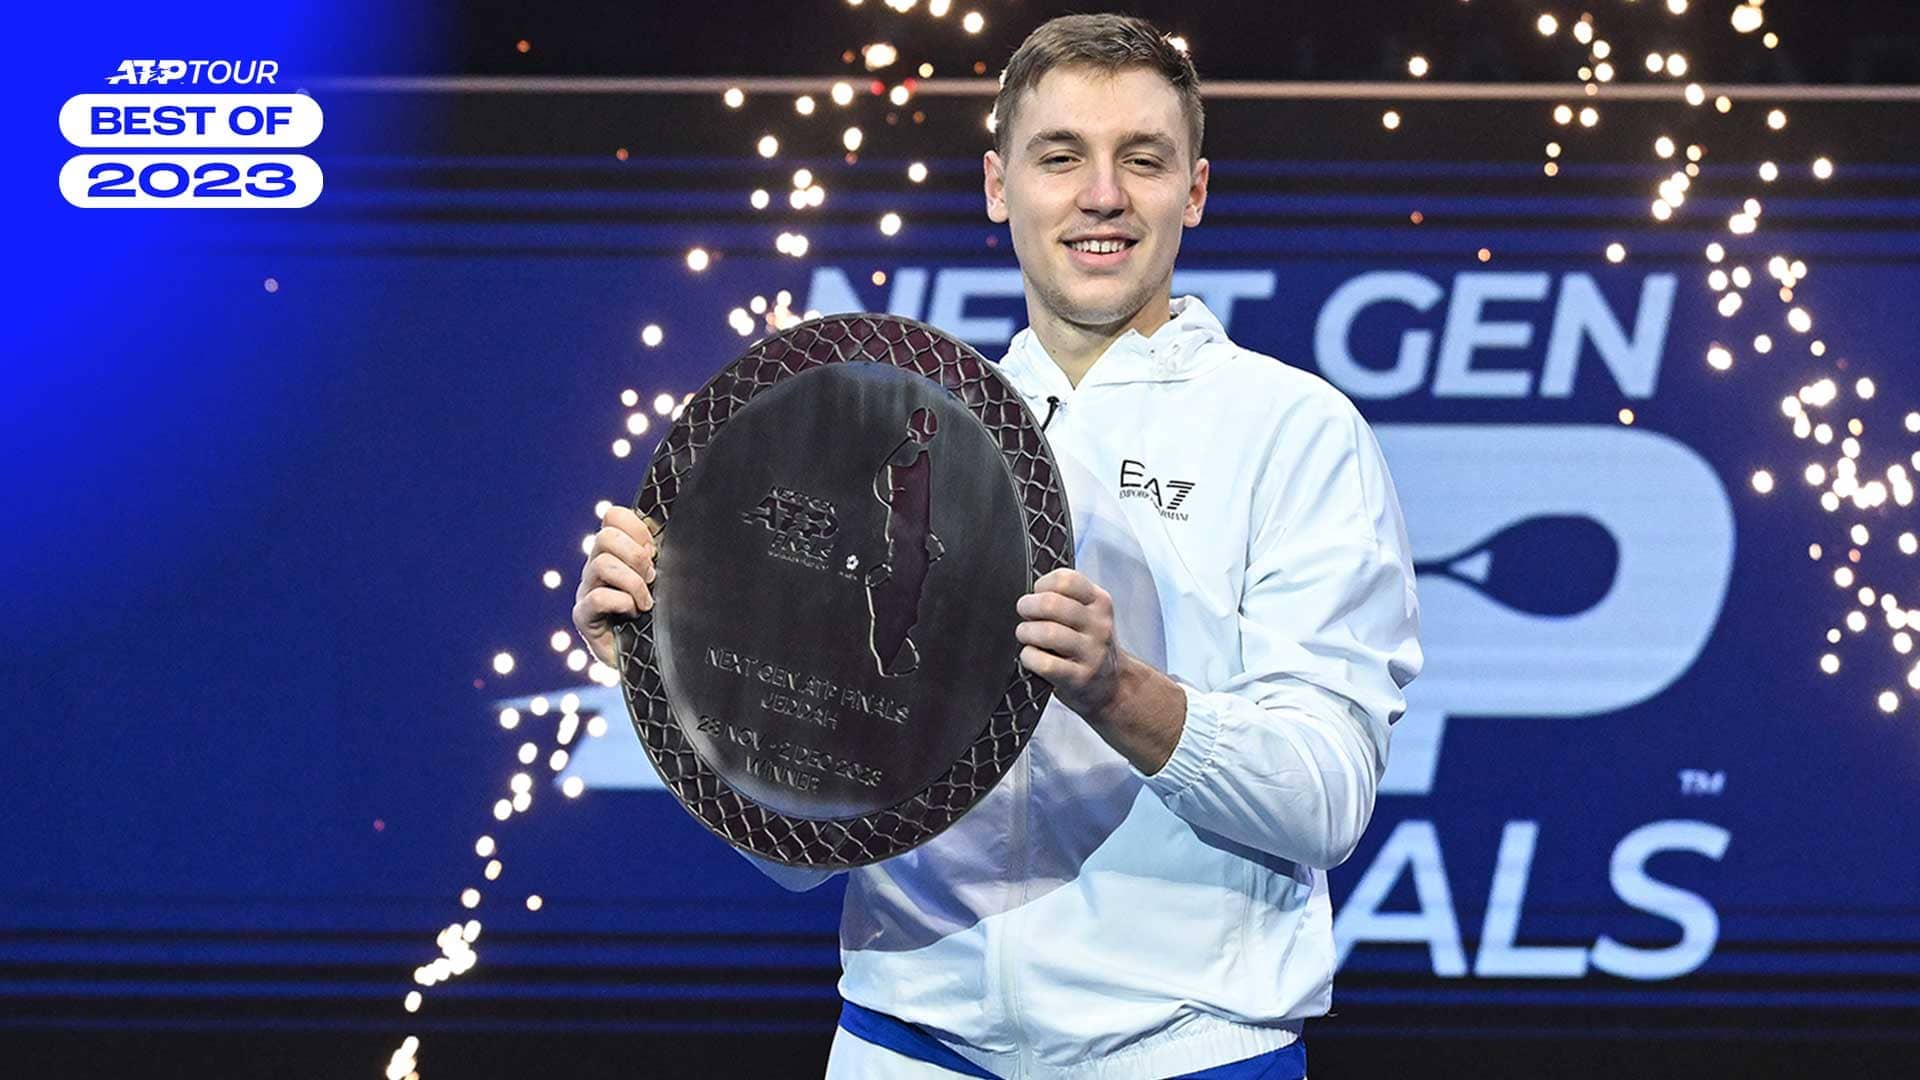 Hamad Medjedovic won the Next Gen ATP Finals presented by NEOM crown earlier this month.